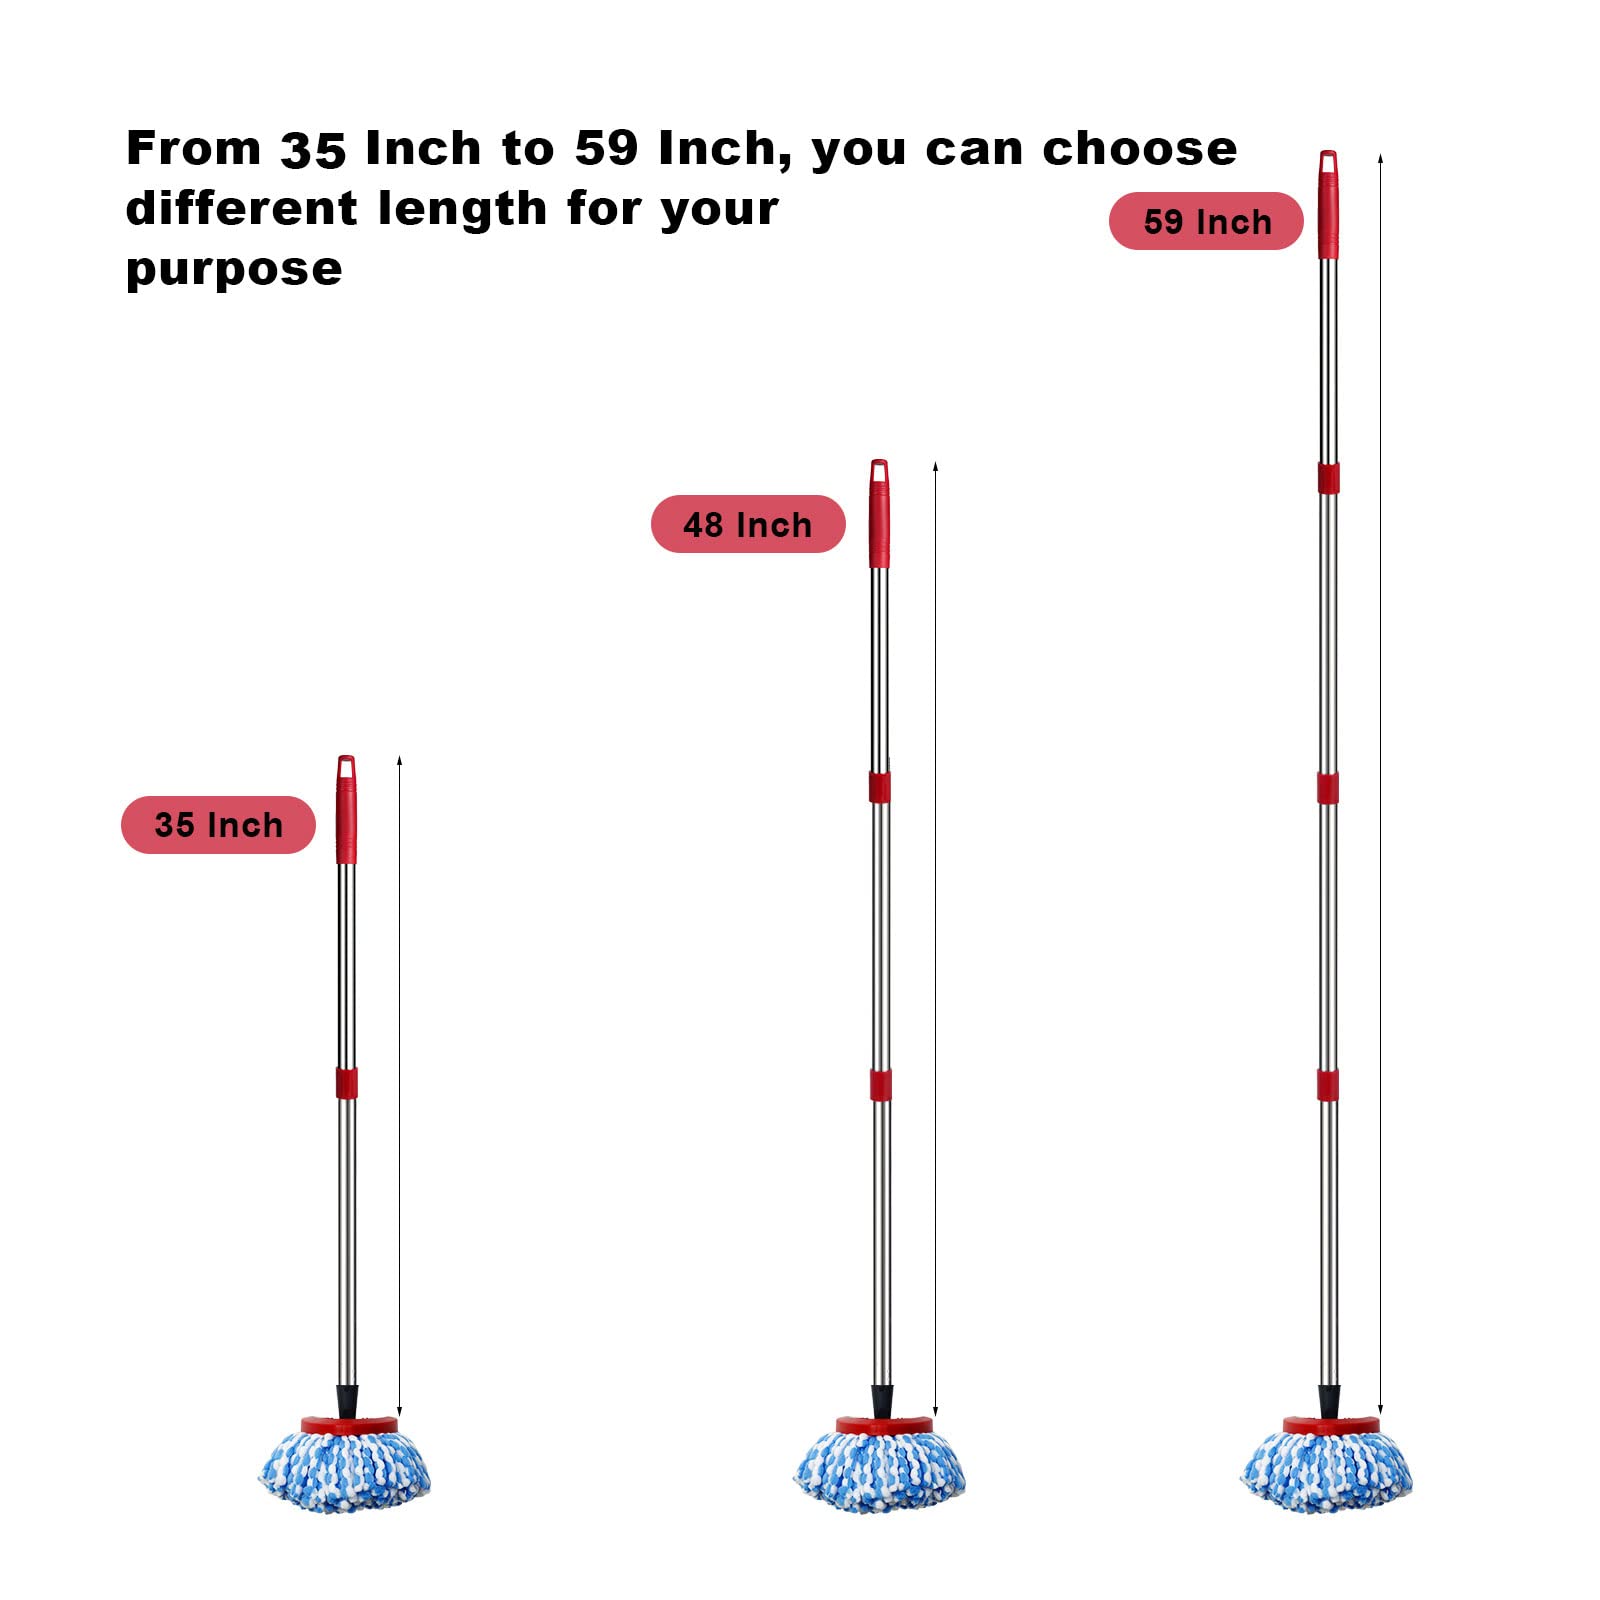 Spin Mop Replacement Handle - 4 Section Mop or Broom Handle/Stick Compatible with O Cedar Spin Mop Refills and Brooms, 30